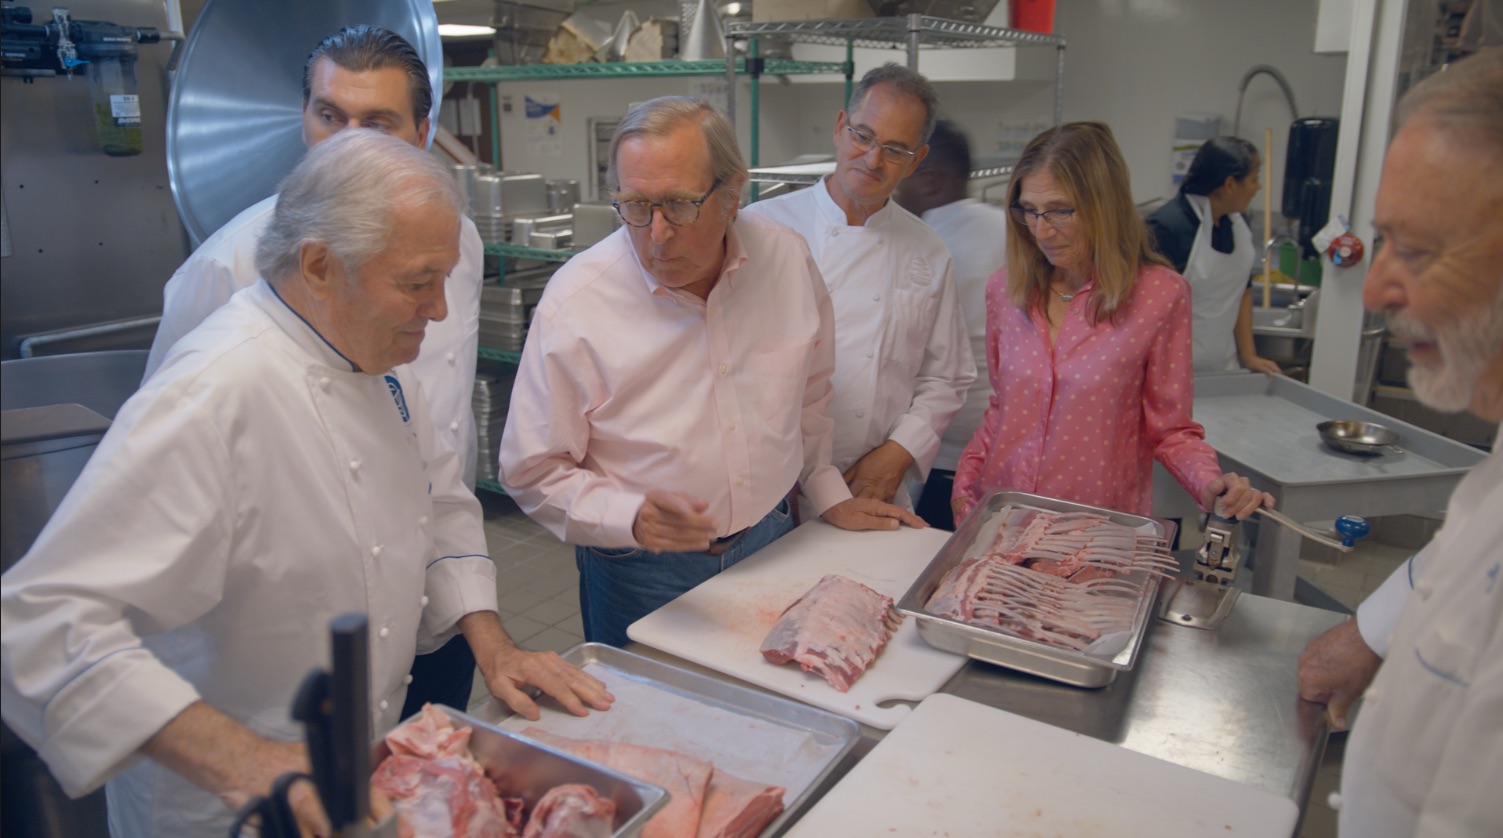 The Jamisons worked with Jacques Pepin at a recent tribute to Jean Louis Palladin.